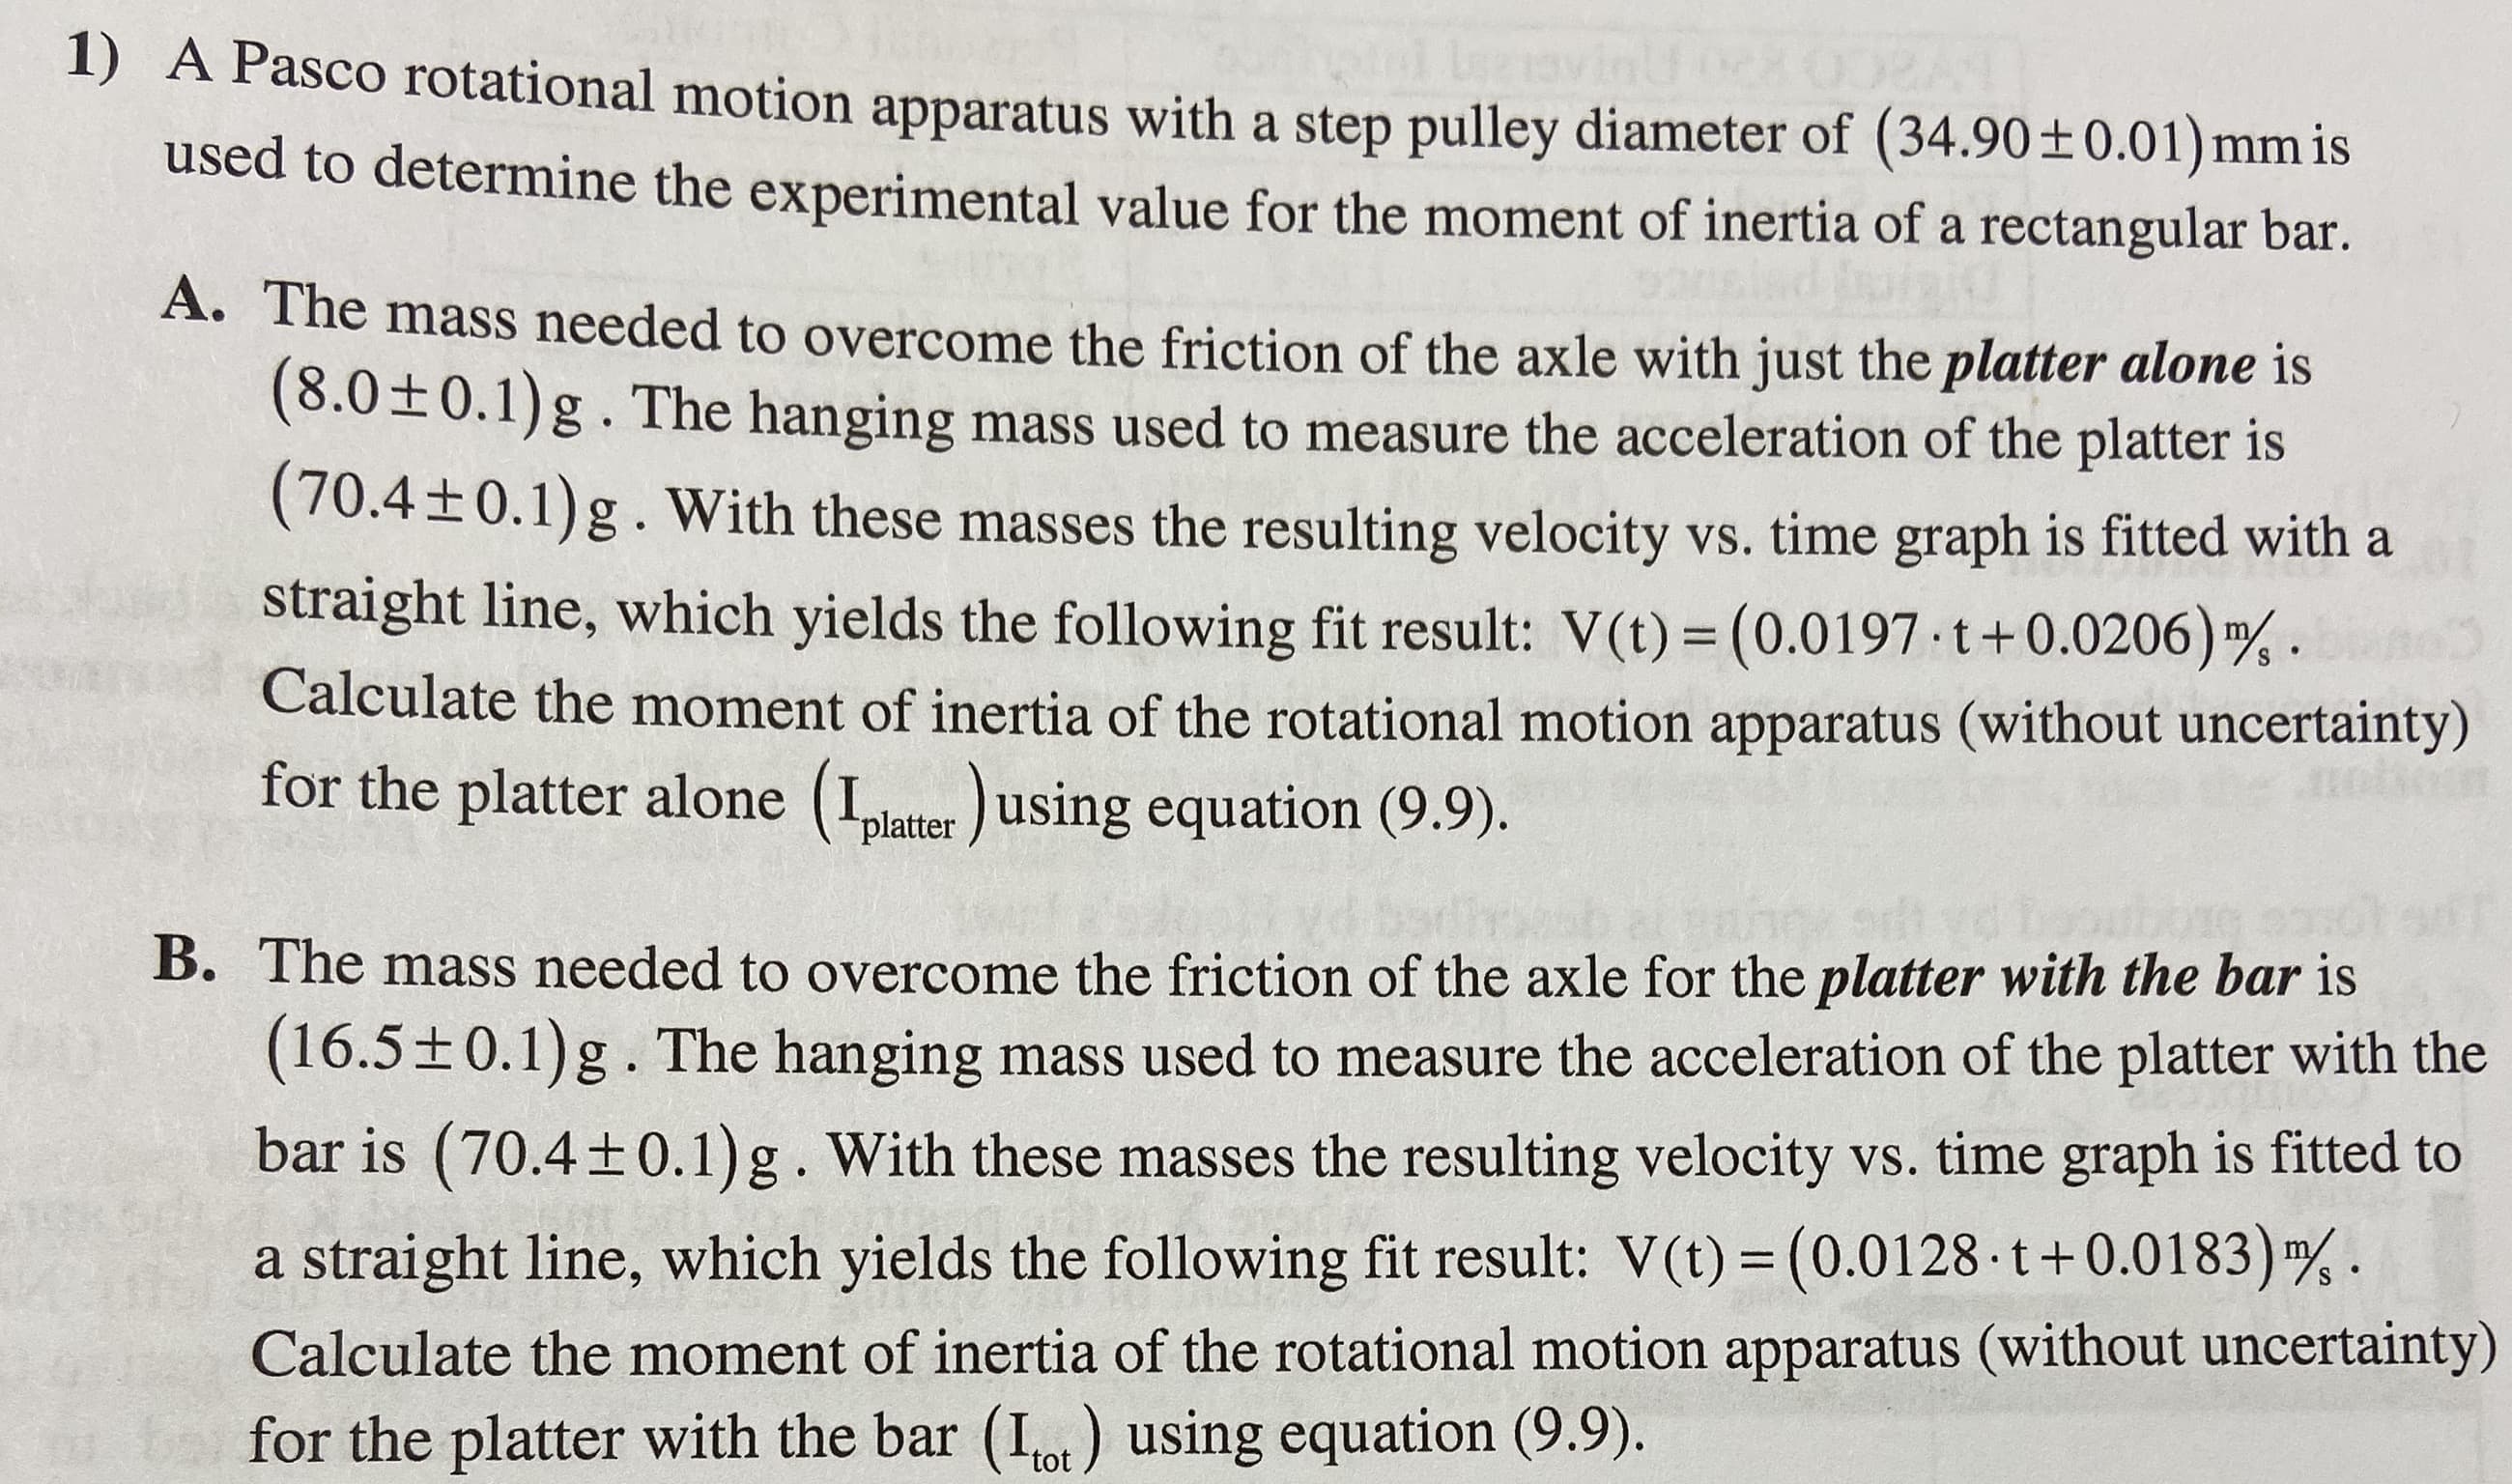 1) A Pasco rotational motion apparatus with a step pulley diameter of (34.90 ± 0.01) mm is
used to determine the experimental value for the moment of inertia of a rectangular bar
A. The mass needed to overcome the friction of the axle with just the platter alone is
(8.0±0.1)g.The hanging mass used to measure the acceleration of the platter is
(70.4+0.1) g. With these masses the resulting velocity vs. time graph is fitted with a
straight line, which yields the following fit result: V(t) (0.0197 t+0.0206) 4
Calculate the moment of inertia of the rotational motion apparatus (without uncertainty)
for the platter alone (plater using equation (9.9).
S
e s
B. The mass needed to overcome the friction of the axle for the platter with the bar is
(16.5±0.1)g.The hanging mass used to measure the acceleration of the platter with the
bar is (70.4
0.1)g . With these masses the resulting velocity vs. time graph is fitted to
straight line, which yields the following fit result: V(t) (0.0128 t + 0.01 83)
Calculate the moment of inertia of the rotational motion apparatus (without uncertainty)
bafor the platter with the bar (Iot) using equation (9.9)
